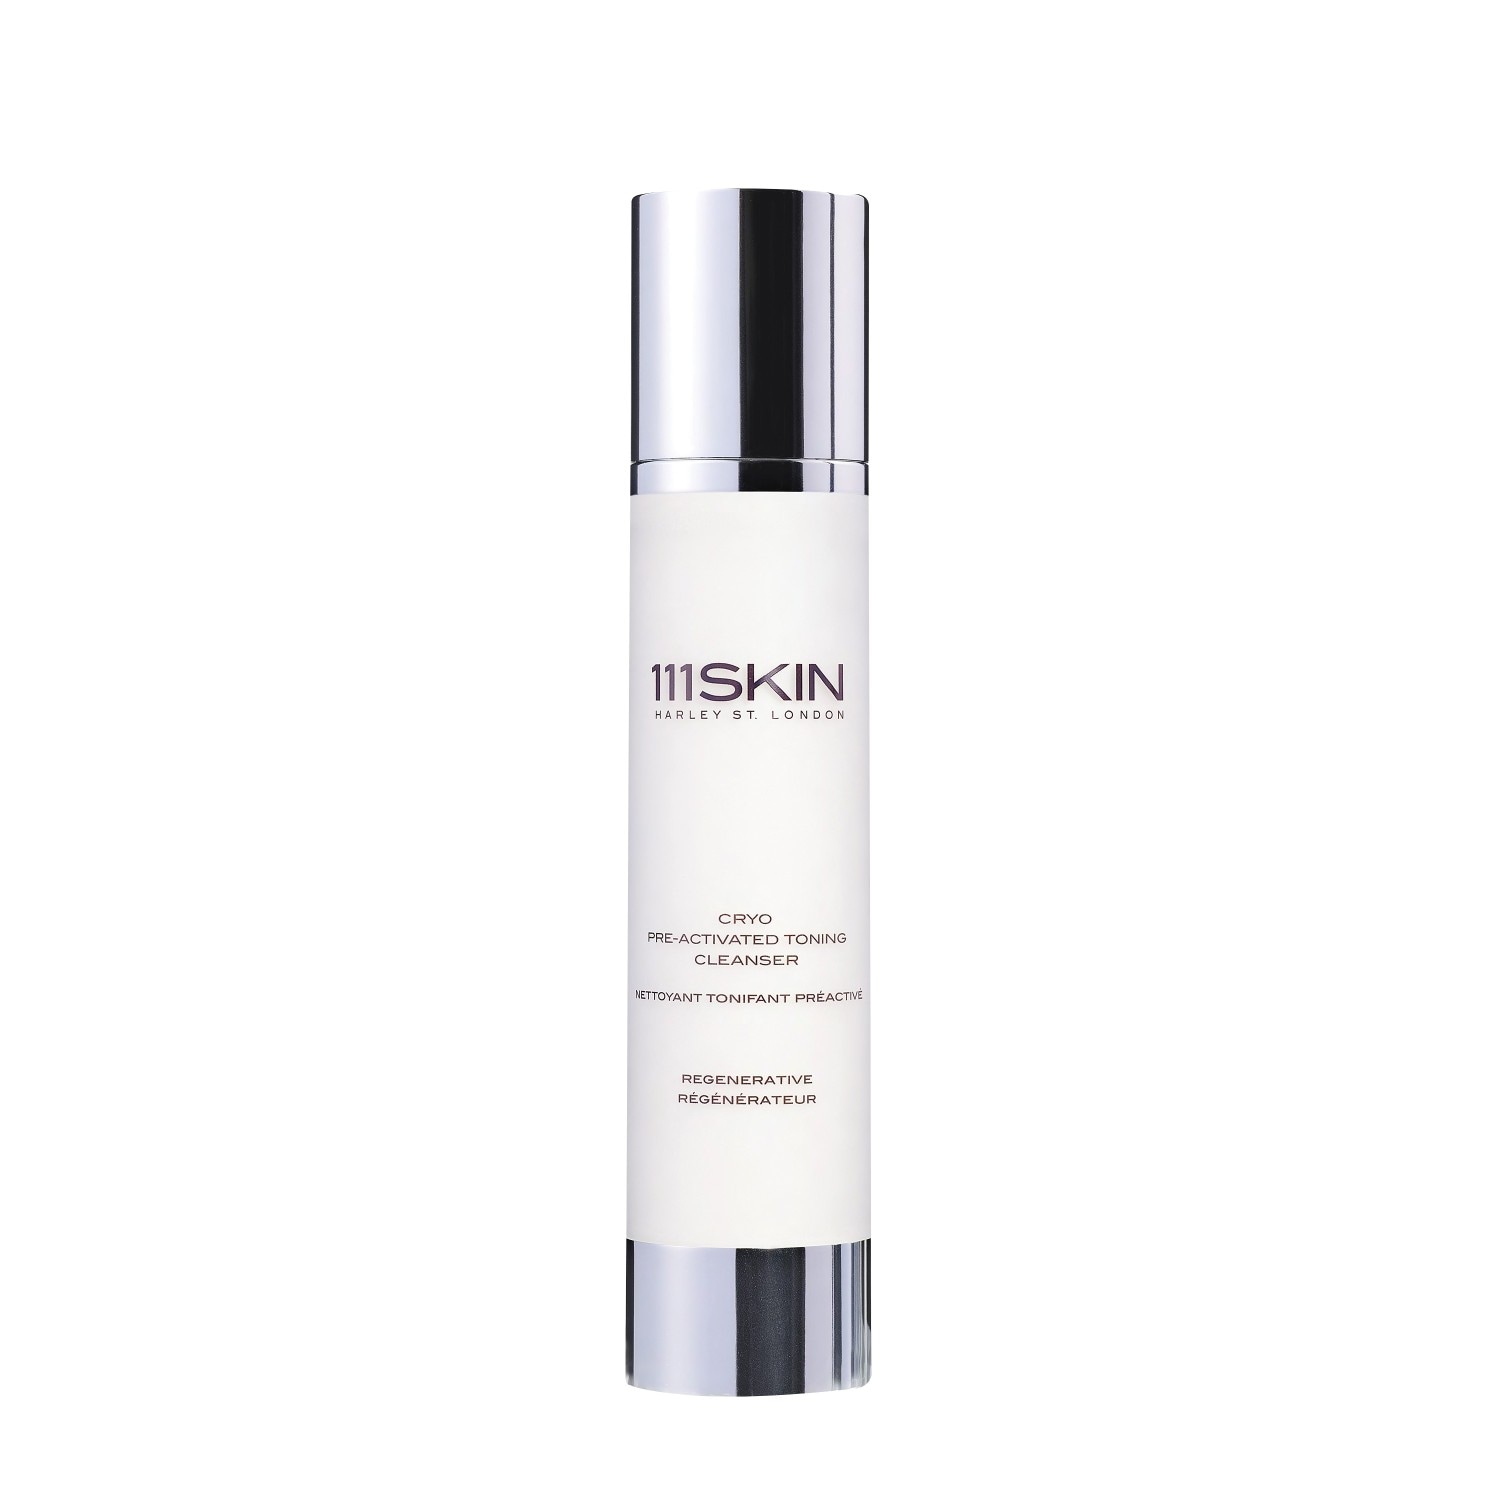 111Skin Cryo Pre- Activated Toning Cleanser